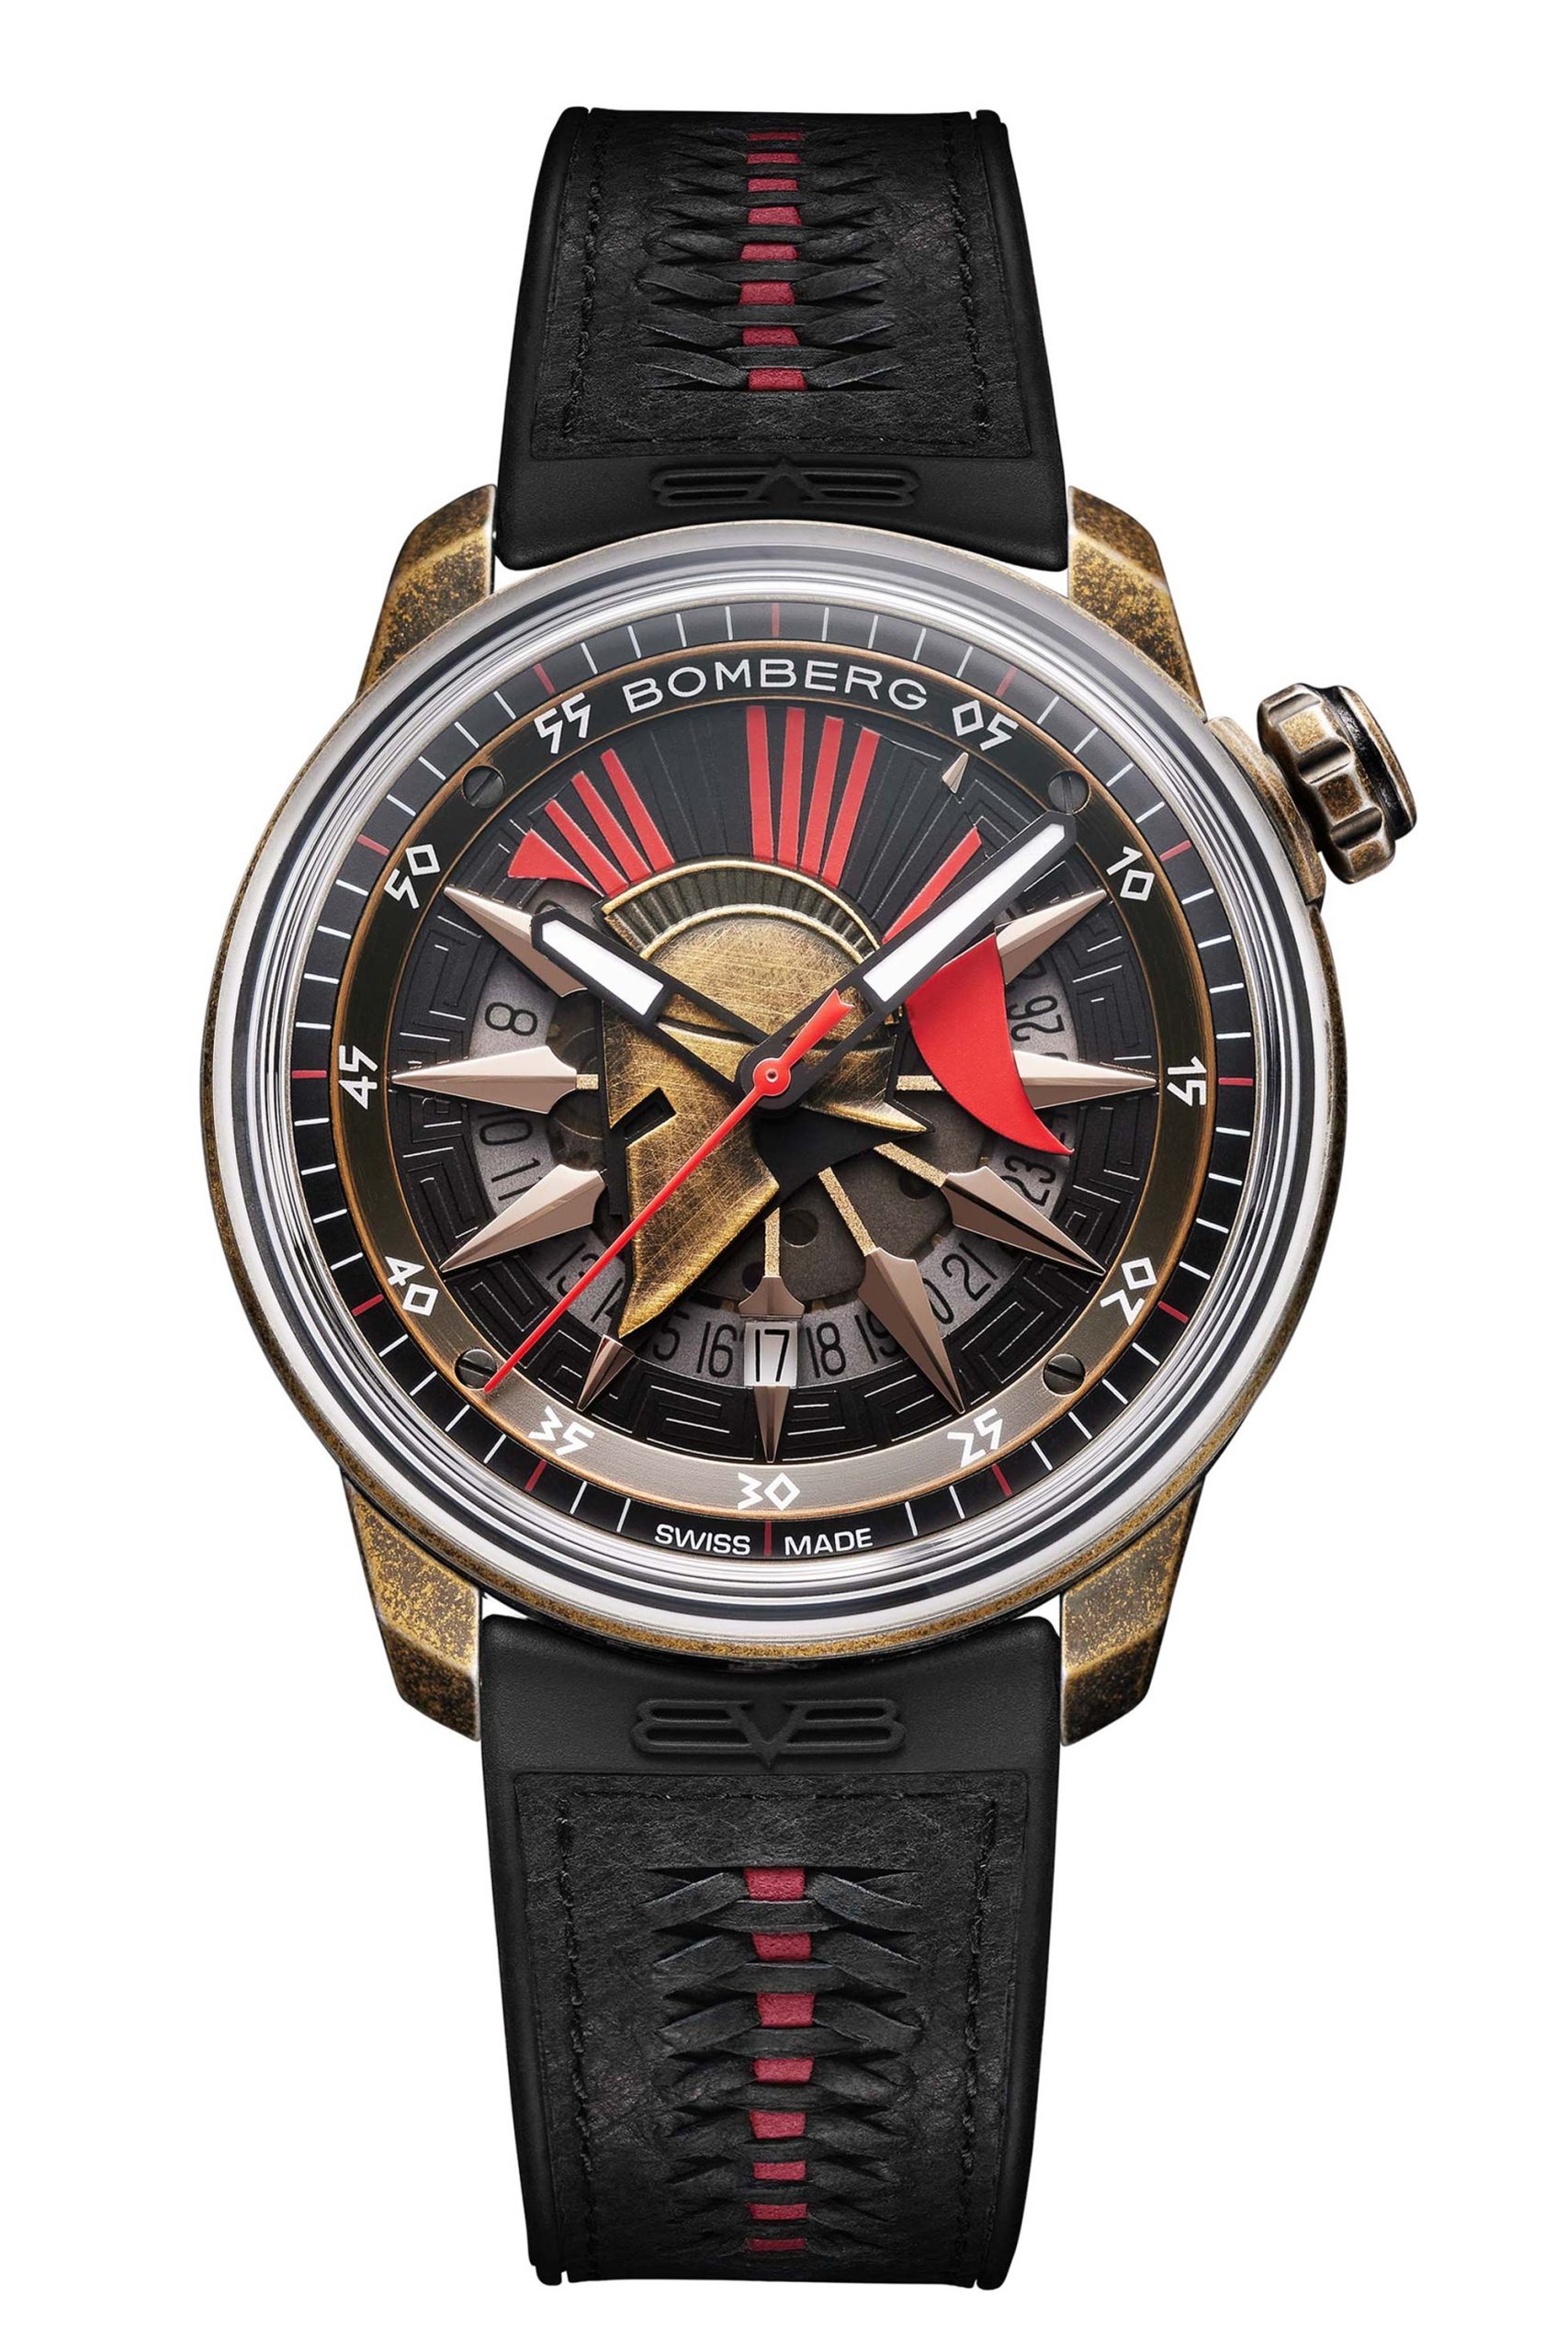 BOMBERG BB-01 AUTOMATIC Spartan Red